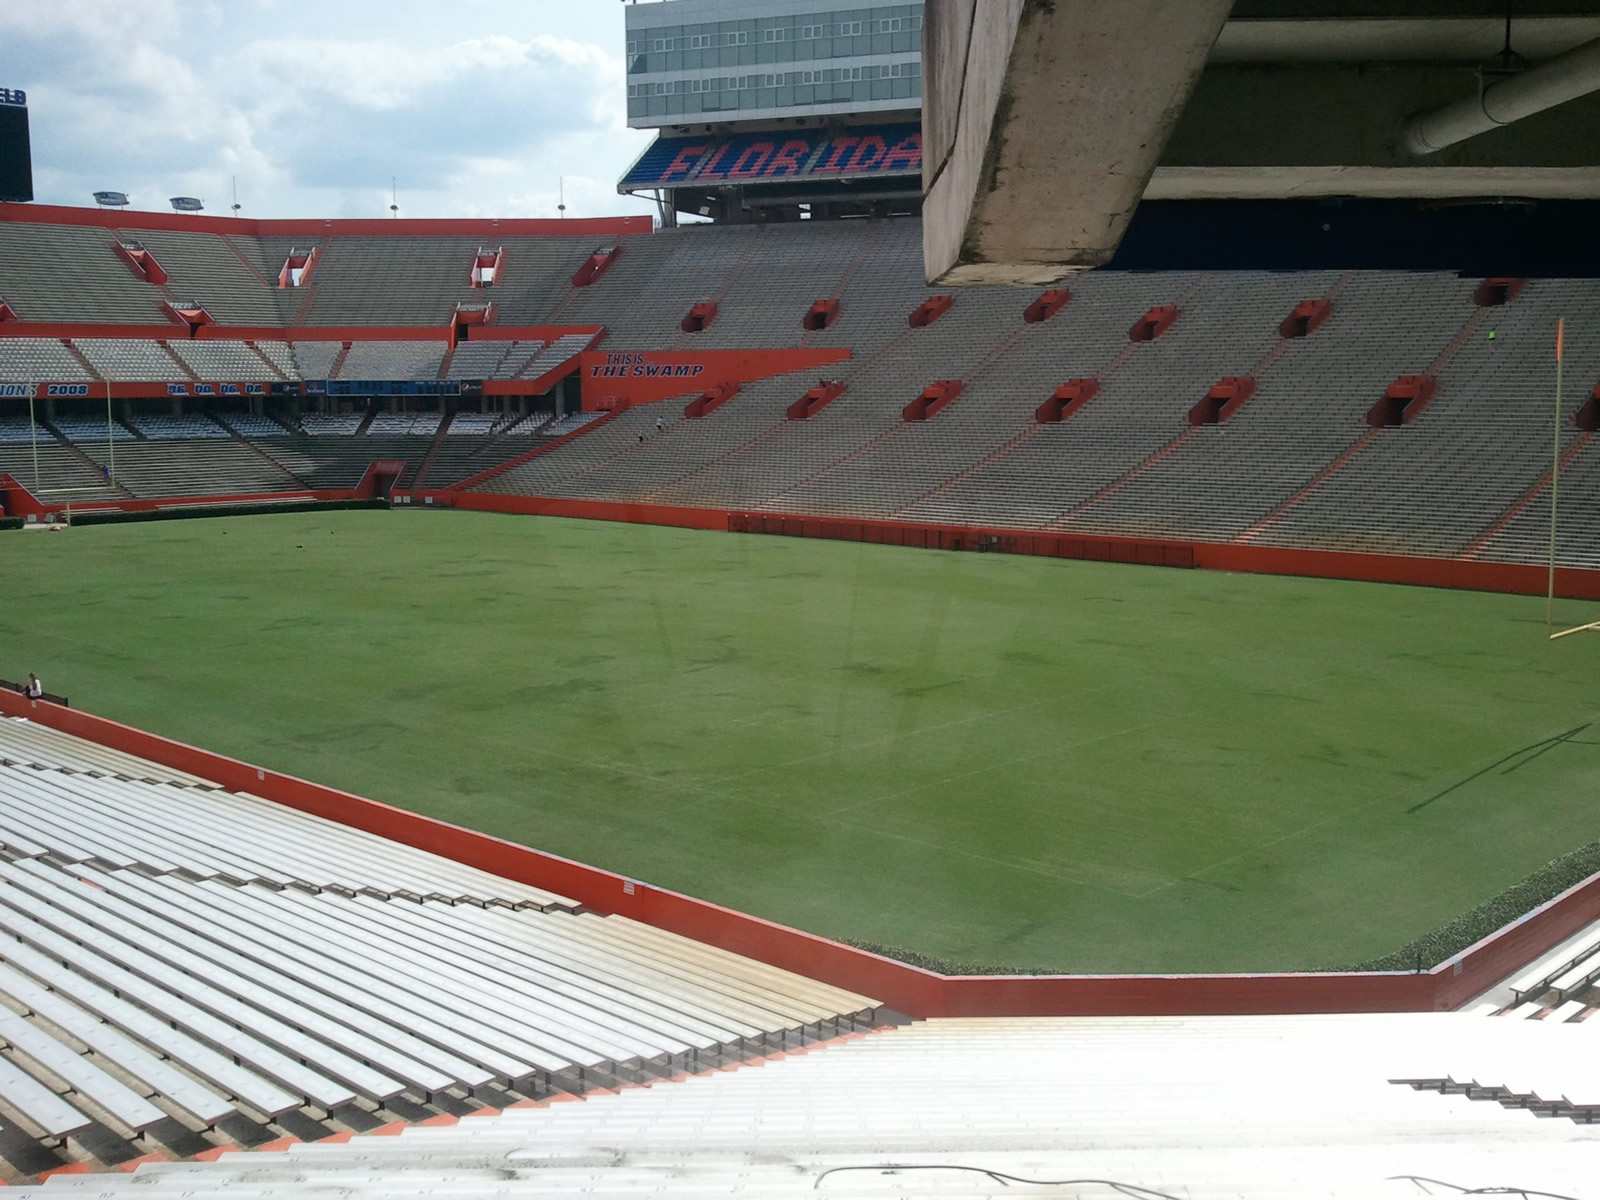 section 26, row 37 seat view  - ben hill griffin stadium